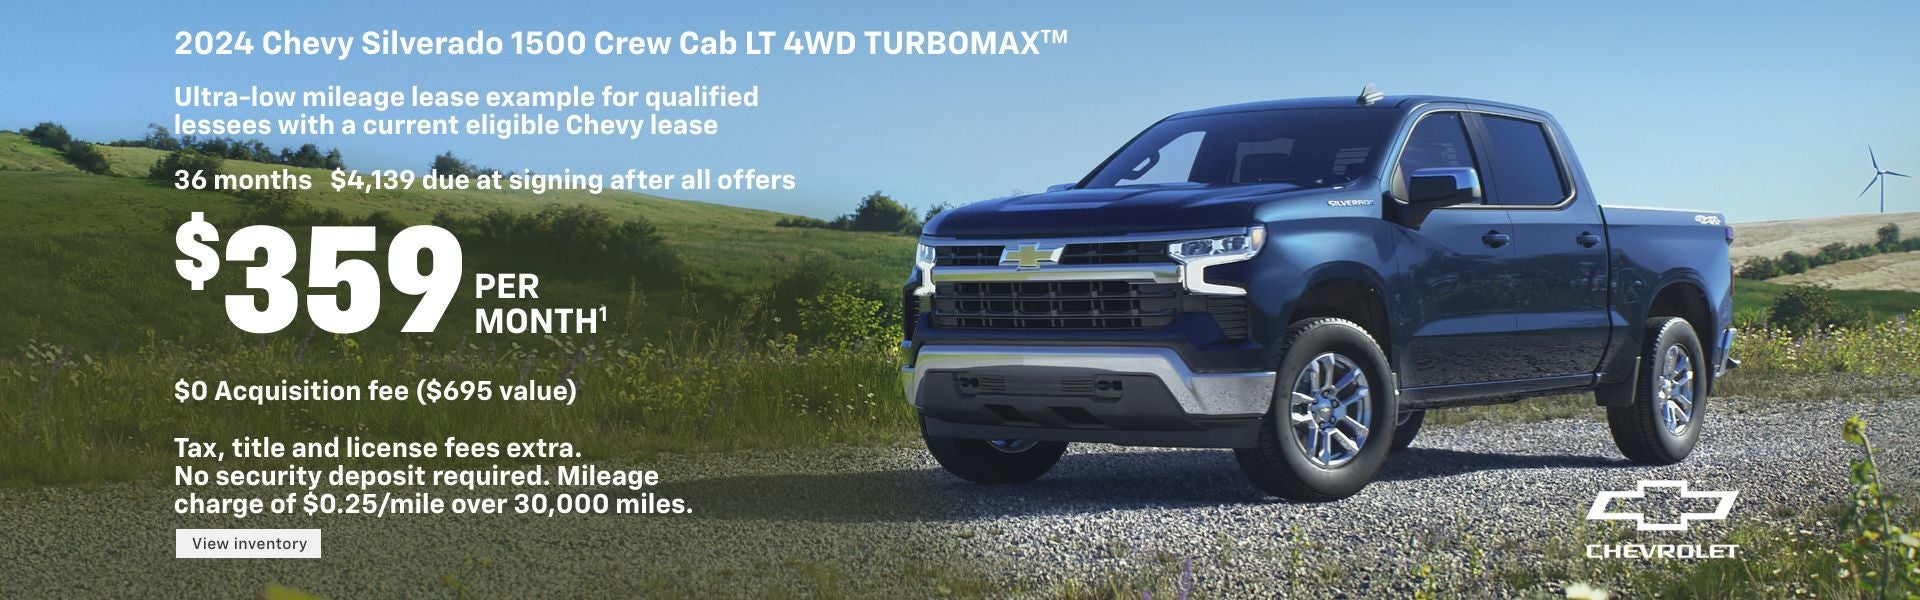 2024 Chevy Silverado 1500 Crew Cab LT 4WD Turbomax. Ultra-low mileage lease example for qualified...